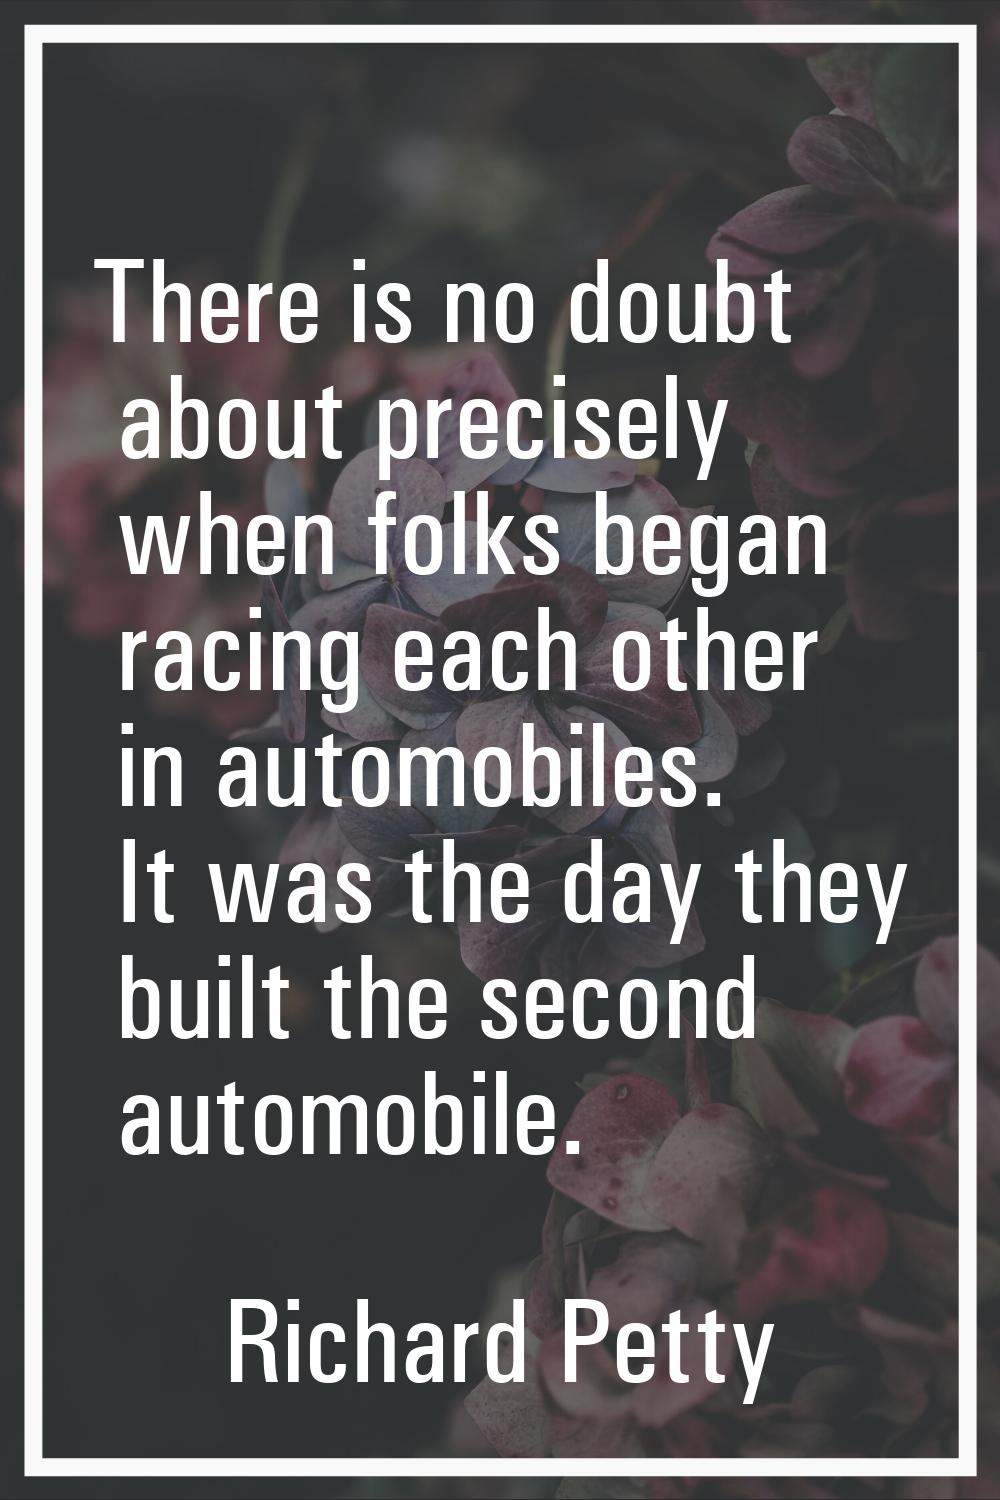 There is no doubt about precisely when folks began racing each other in automobiles. It was the day